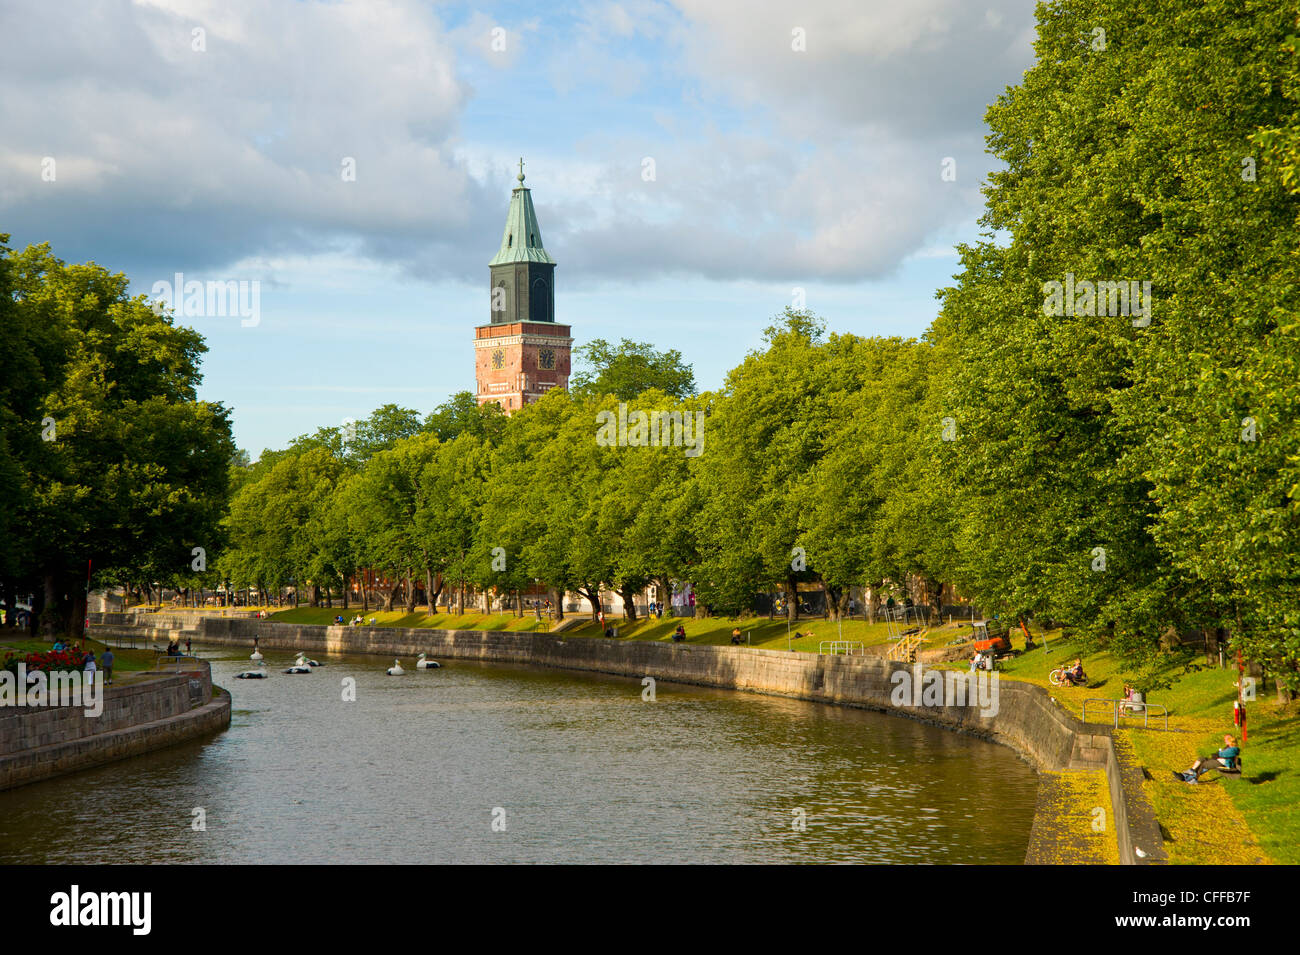 People relax on the banks of river Aura (Aurajoki), Turku Finland with the Cathedral spire on the skyline Stock Photo